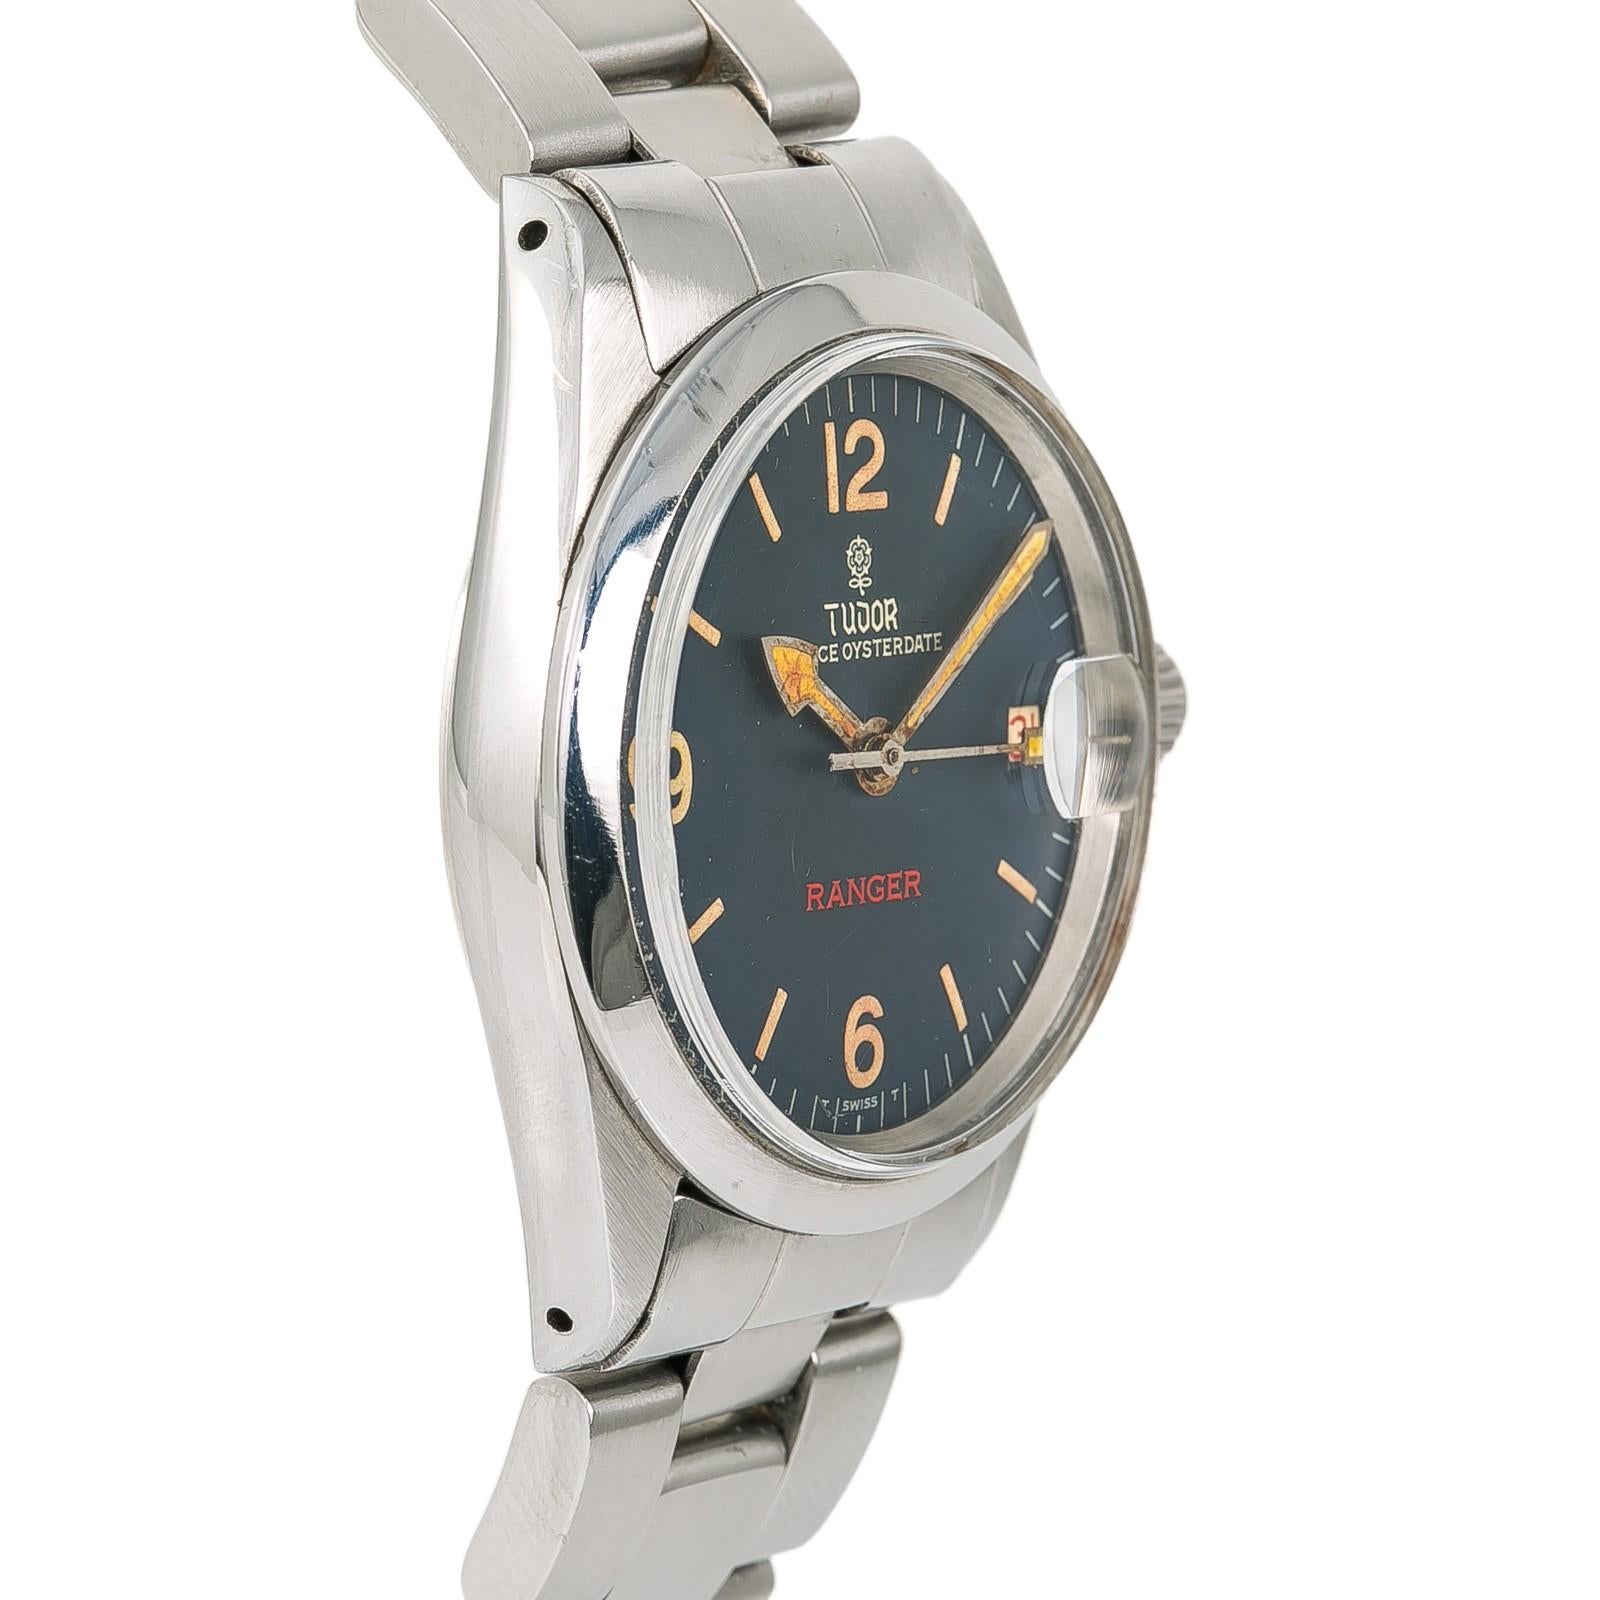 Tudor Ranger Reference #:9050. automatic-self-wind. Verified and Certified by WatchFacts. 1 year warranty offered by WatchFacts.